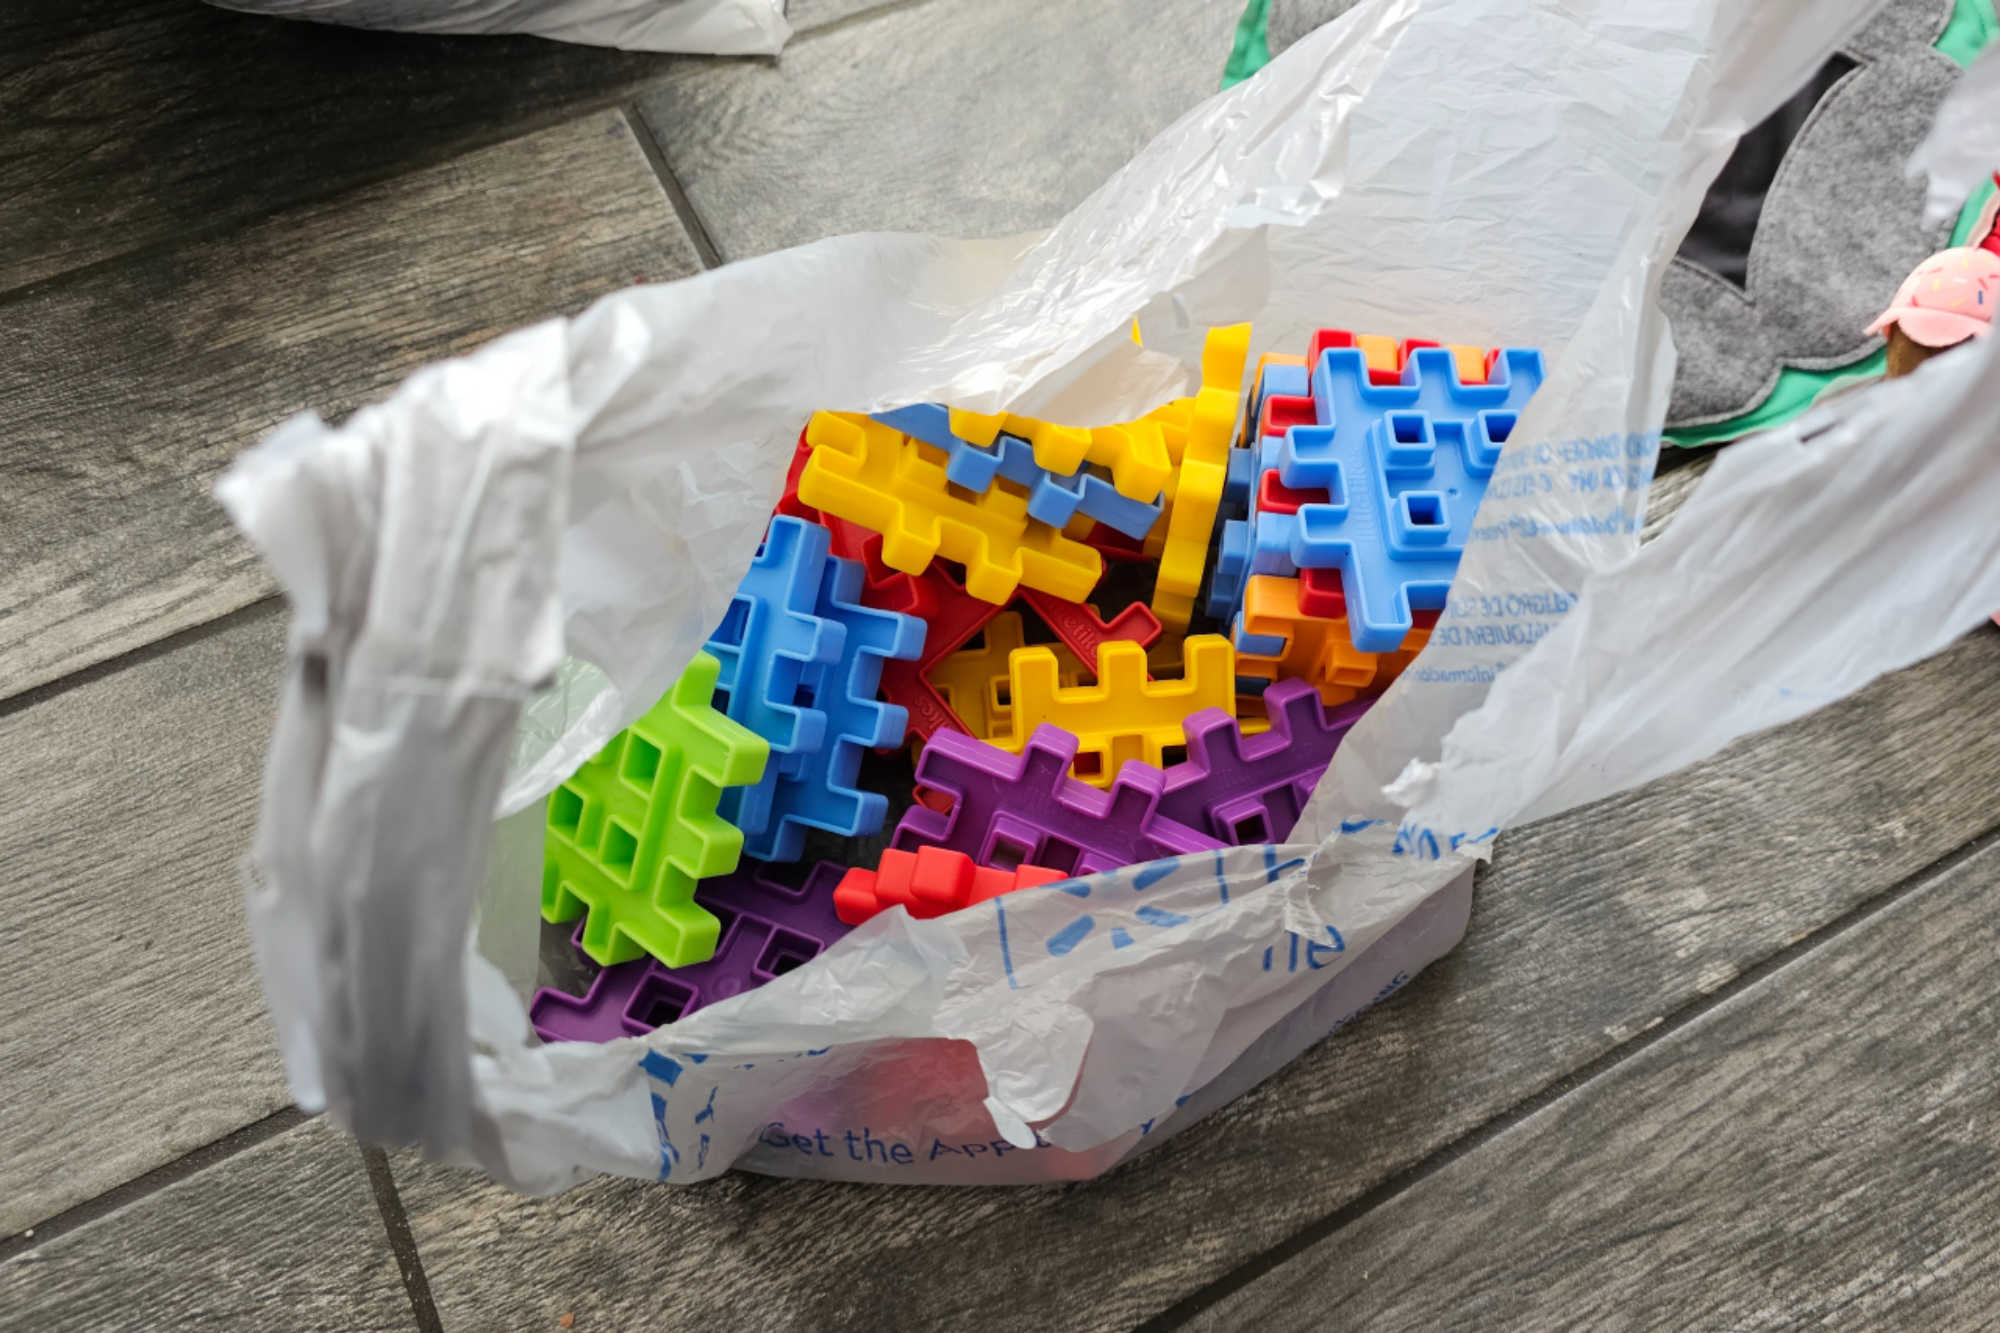 A set of colorful waffle-shaped blocks—part of a set—in a small grocery bag. These blocks are being bagged separately to keep the set together.